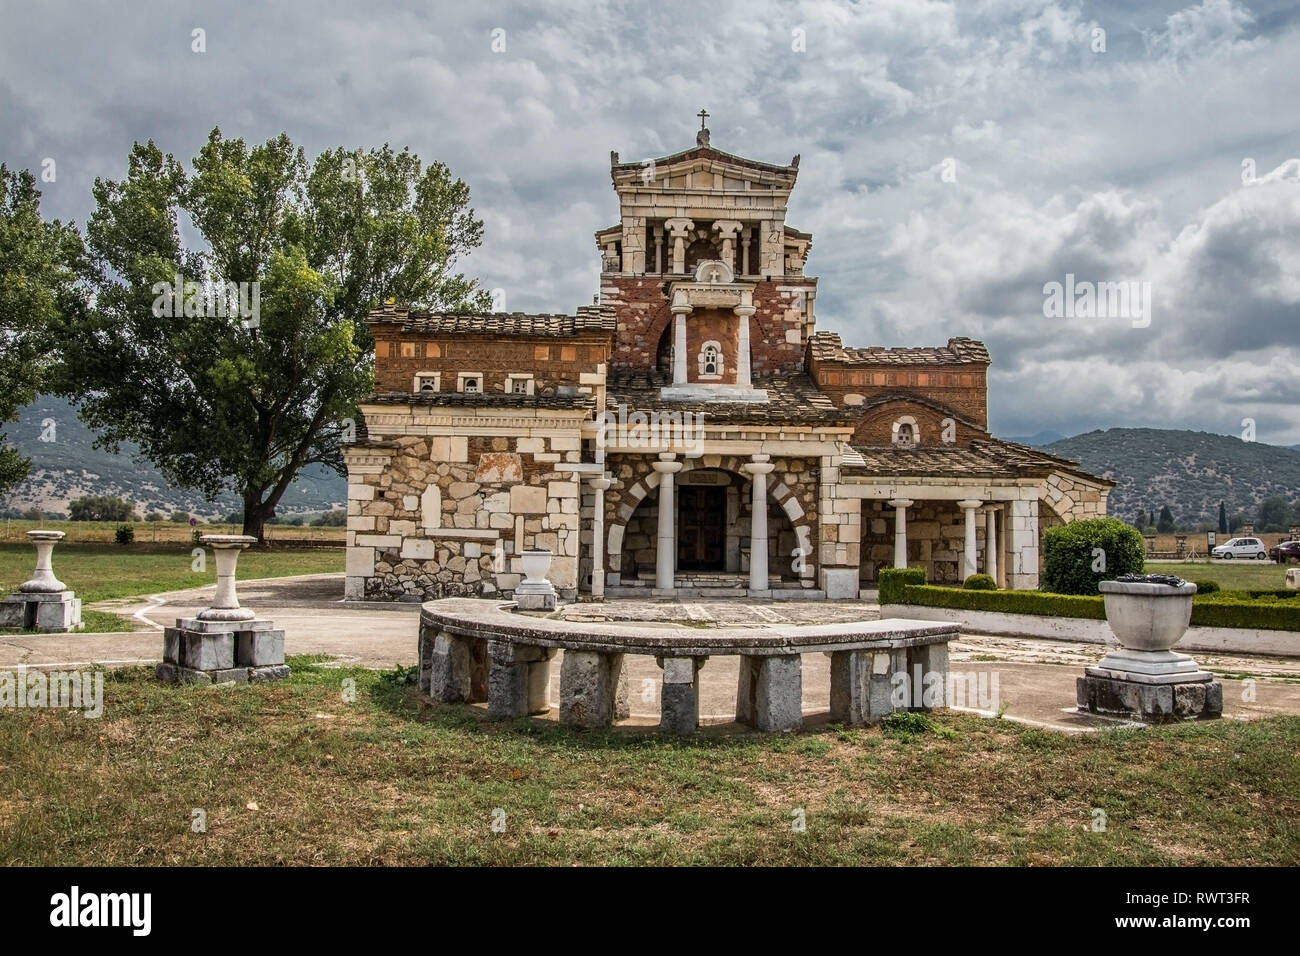 Byzantine church of Agia Fotini with ancient Greece architecture elements, Arcadia, Peloponnese, Greece, Europe Stock Photo